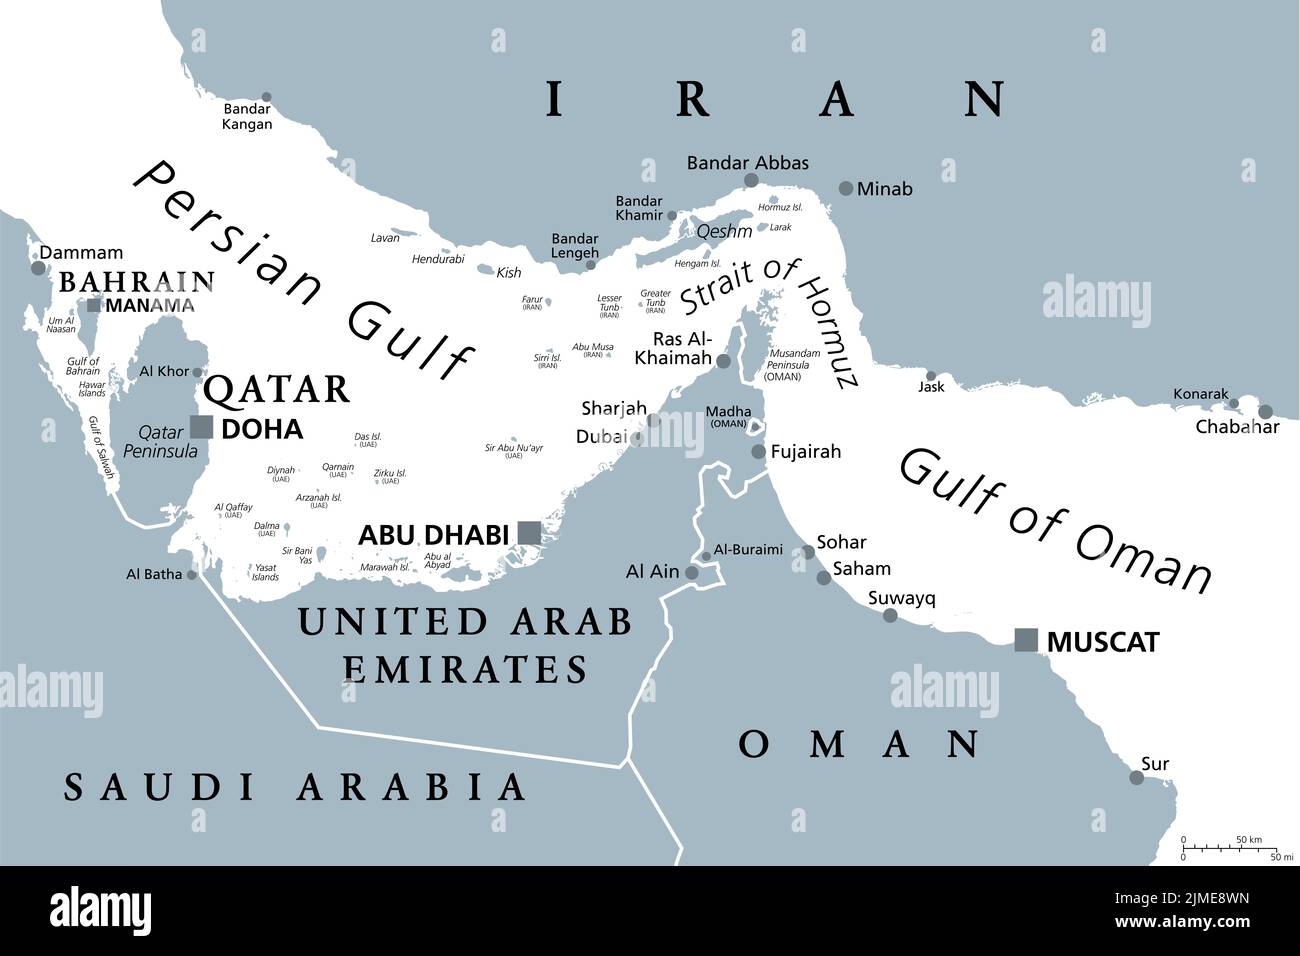 Strait of Hormuz, gray political map. Waterway between Persian Gulf and Gulf of Oman. Strategically very important choke point. Stock Photo